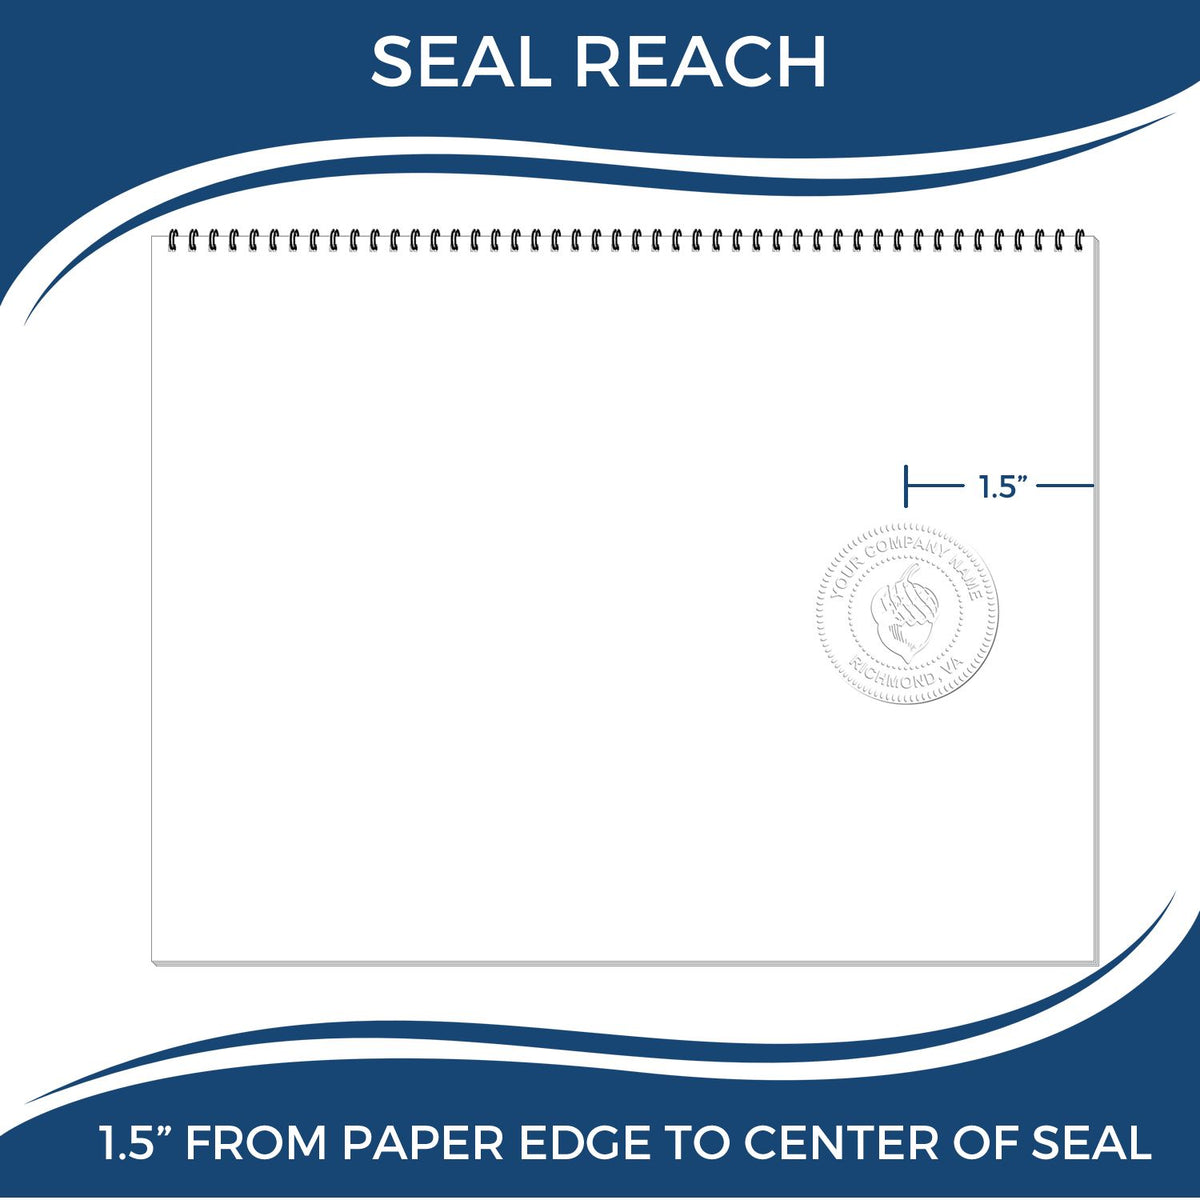 An infographic showing the seal reach which is represented by a ruler and a miniature seal image of the Hybrid Maine Landscape Architect Seal